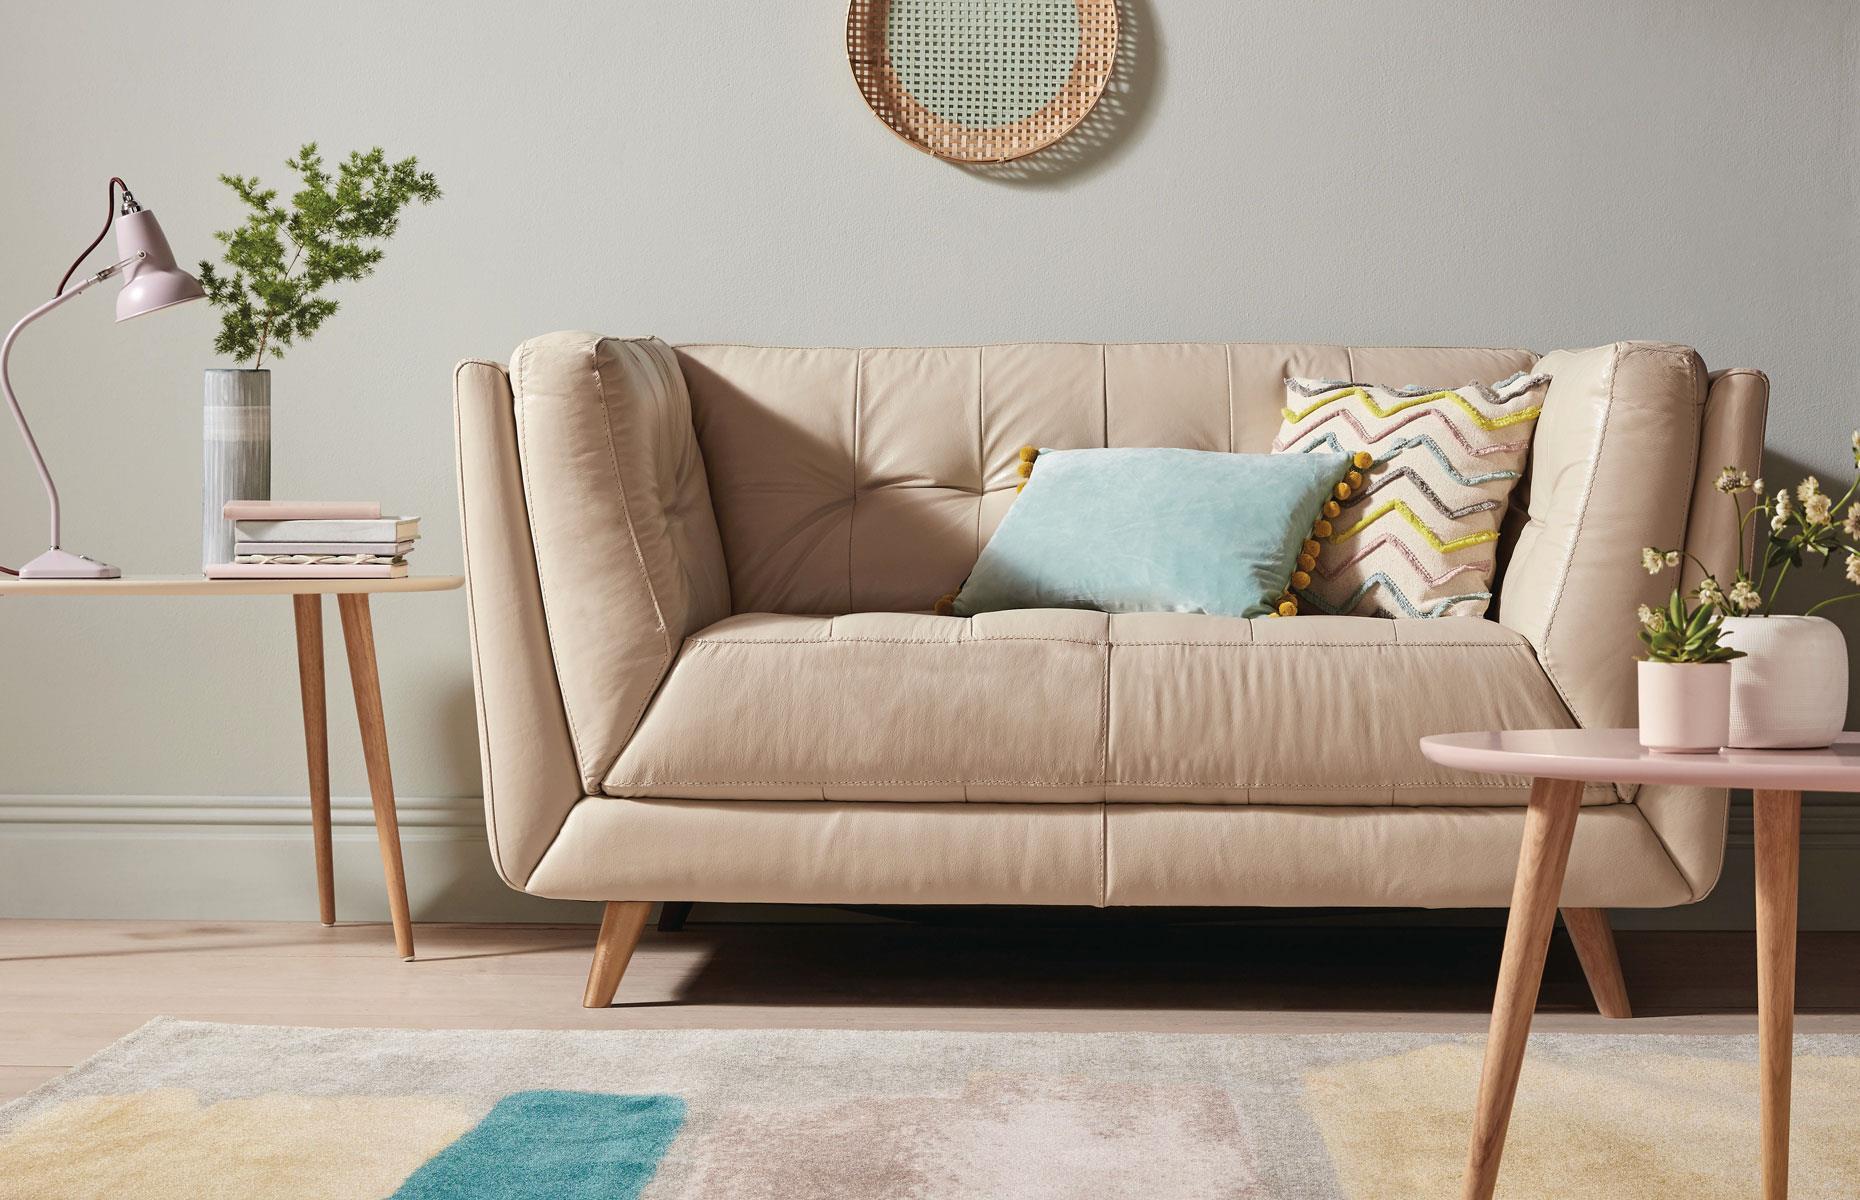 From cosy to spacious: over 40 expert ways to open up your living room